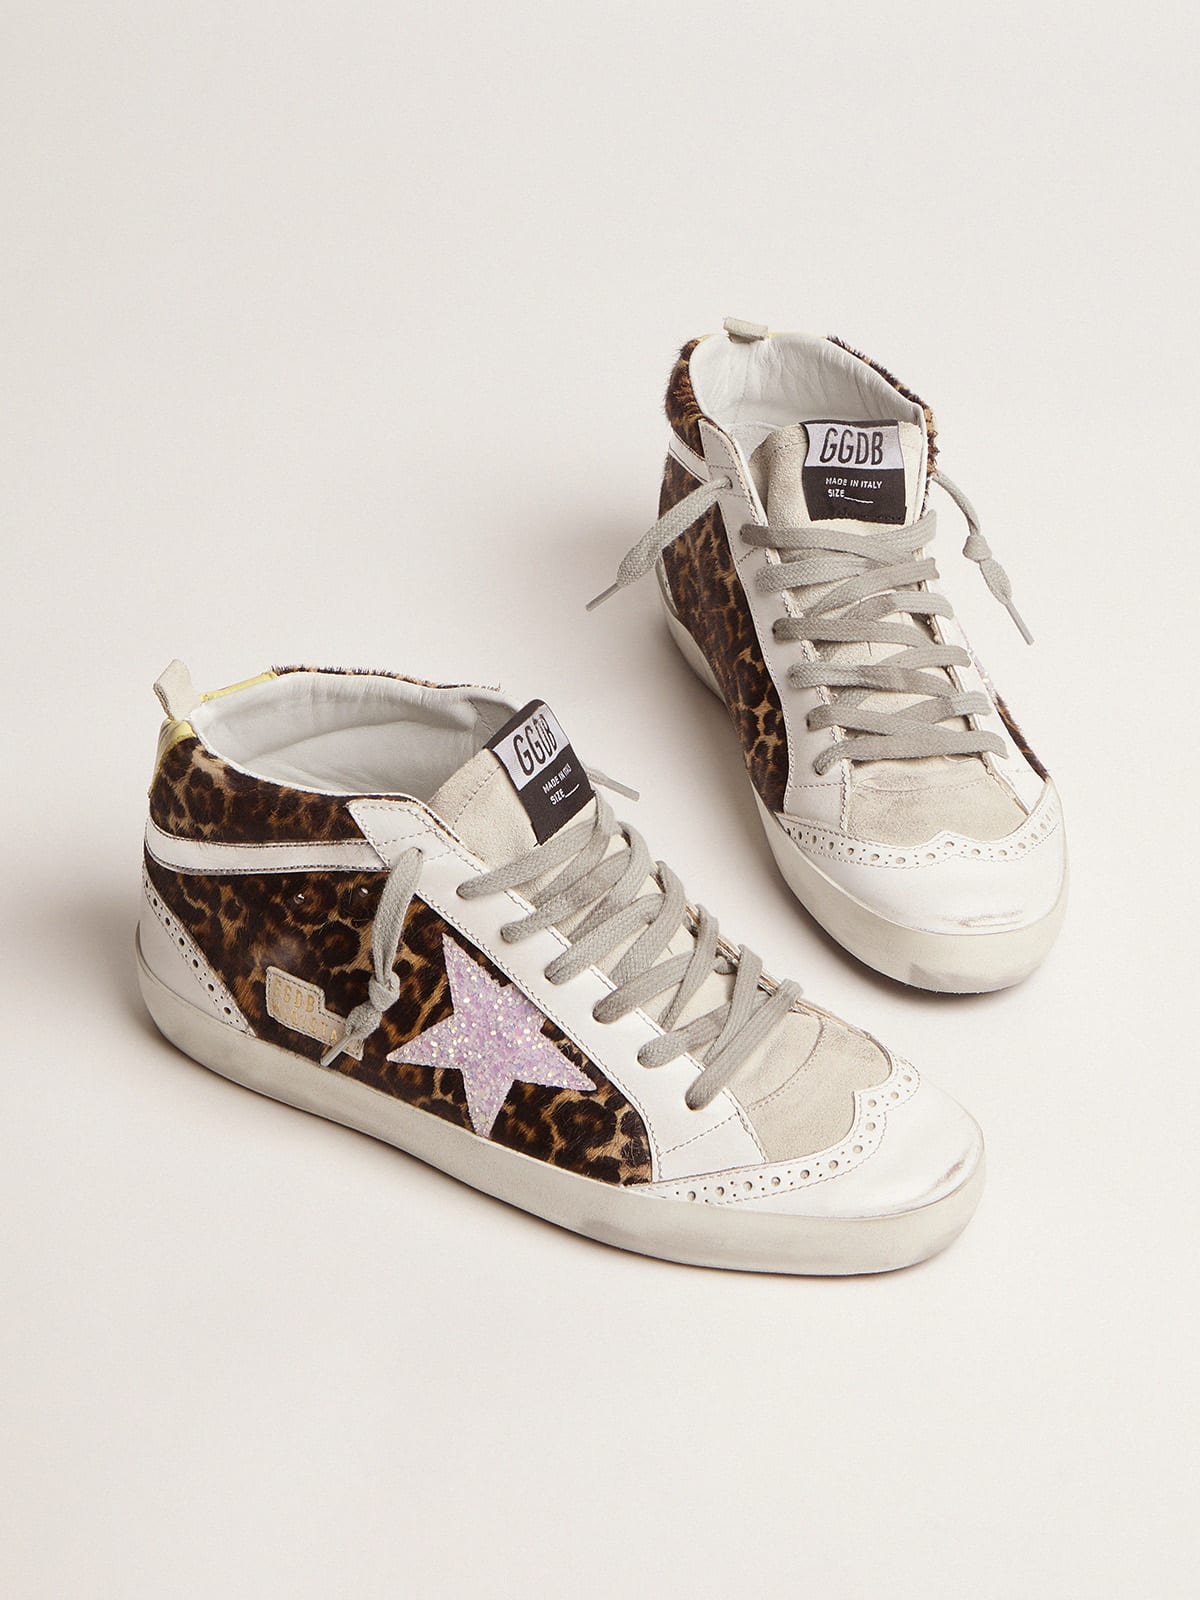 Golden Goose - Mid-Star sneakers LTD in leopard-print pony skin with glittery star in 